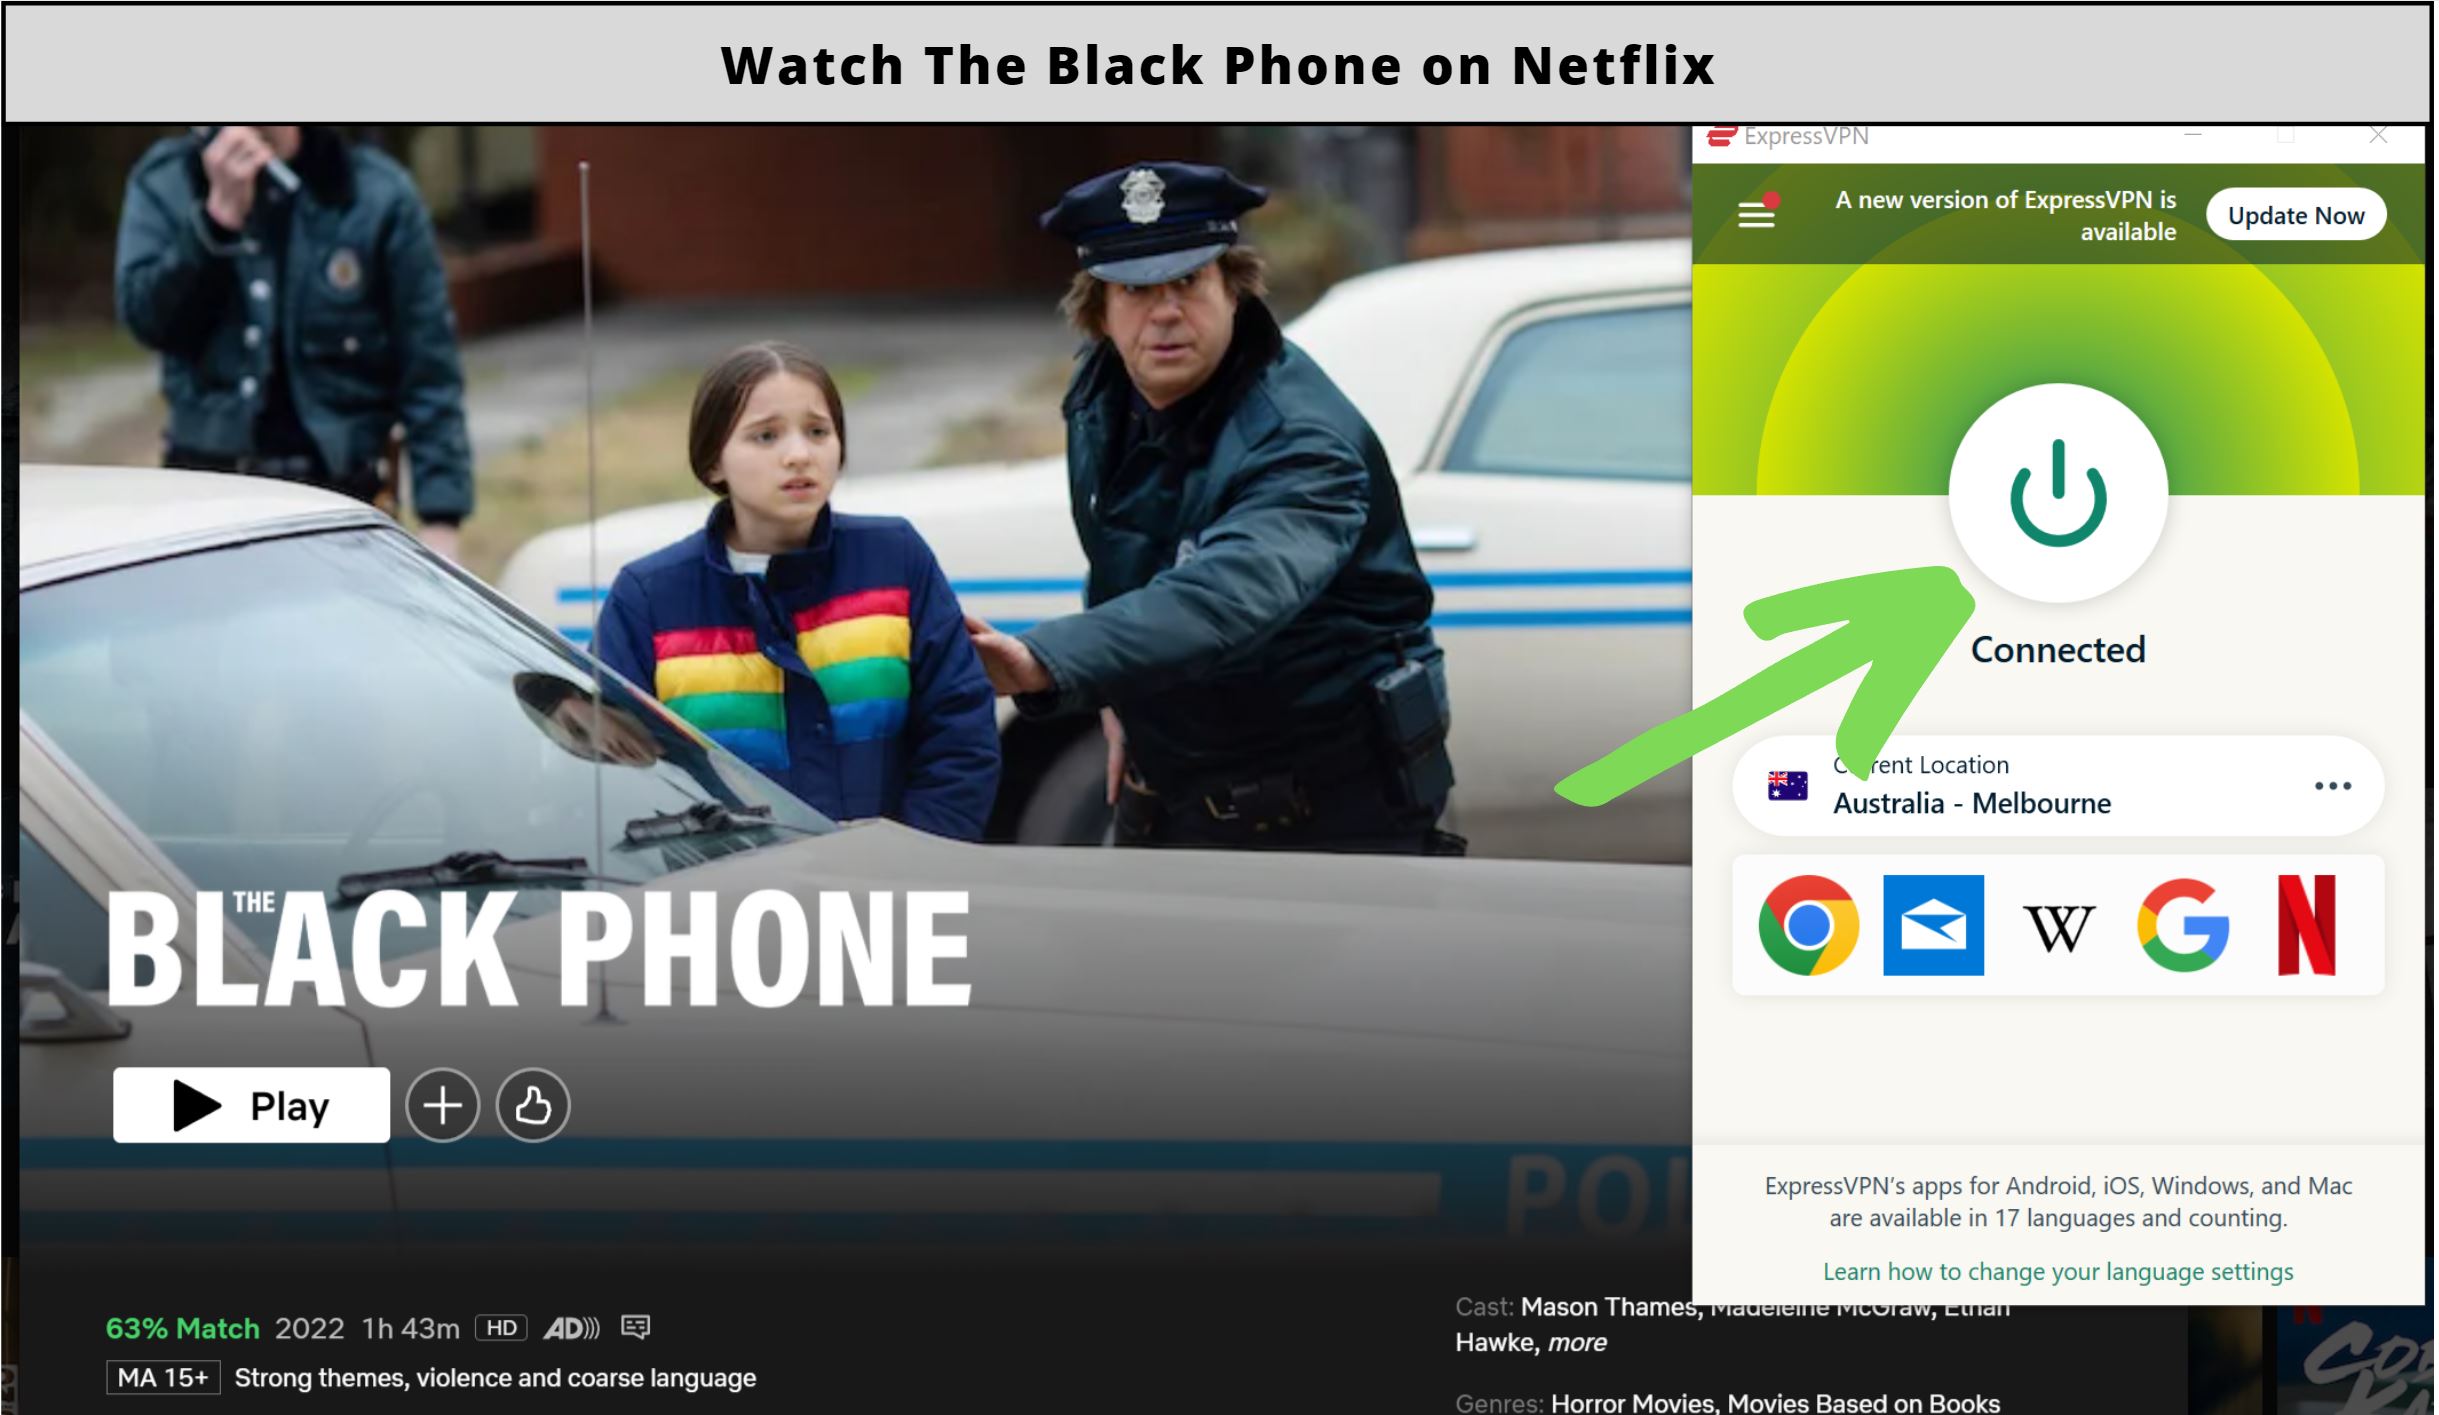 watch The Black Phone on Netflix in 2023?